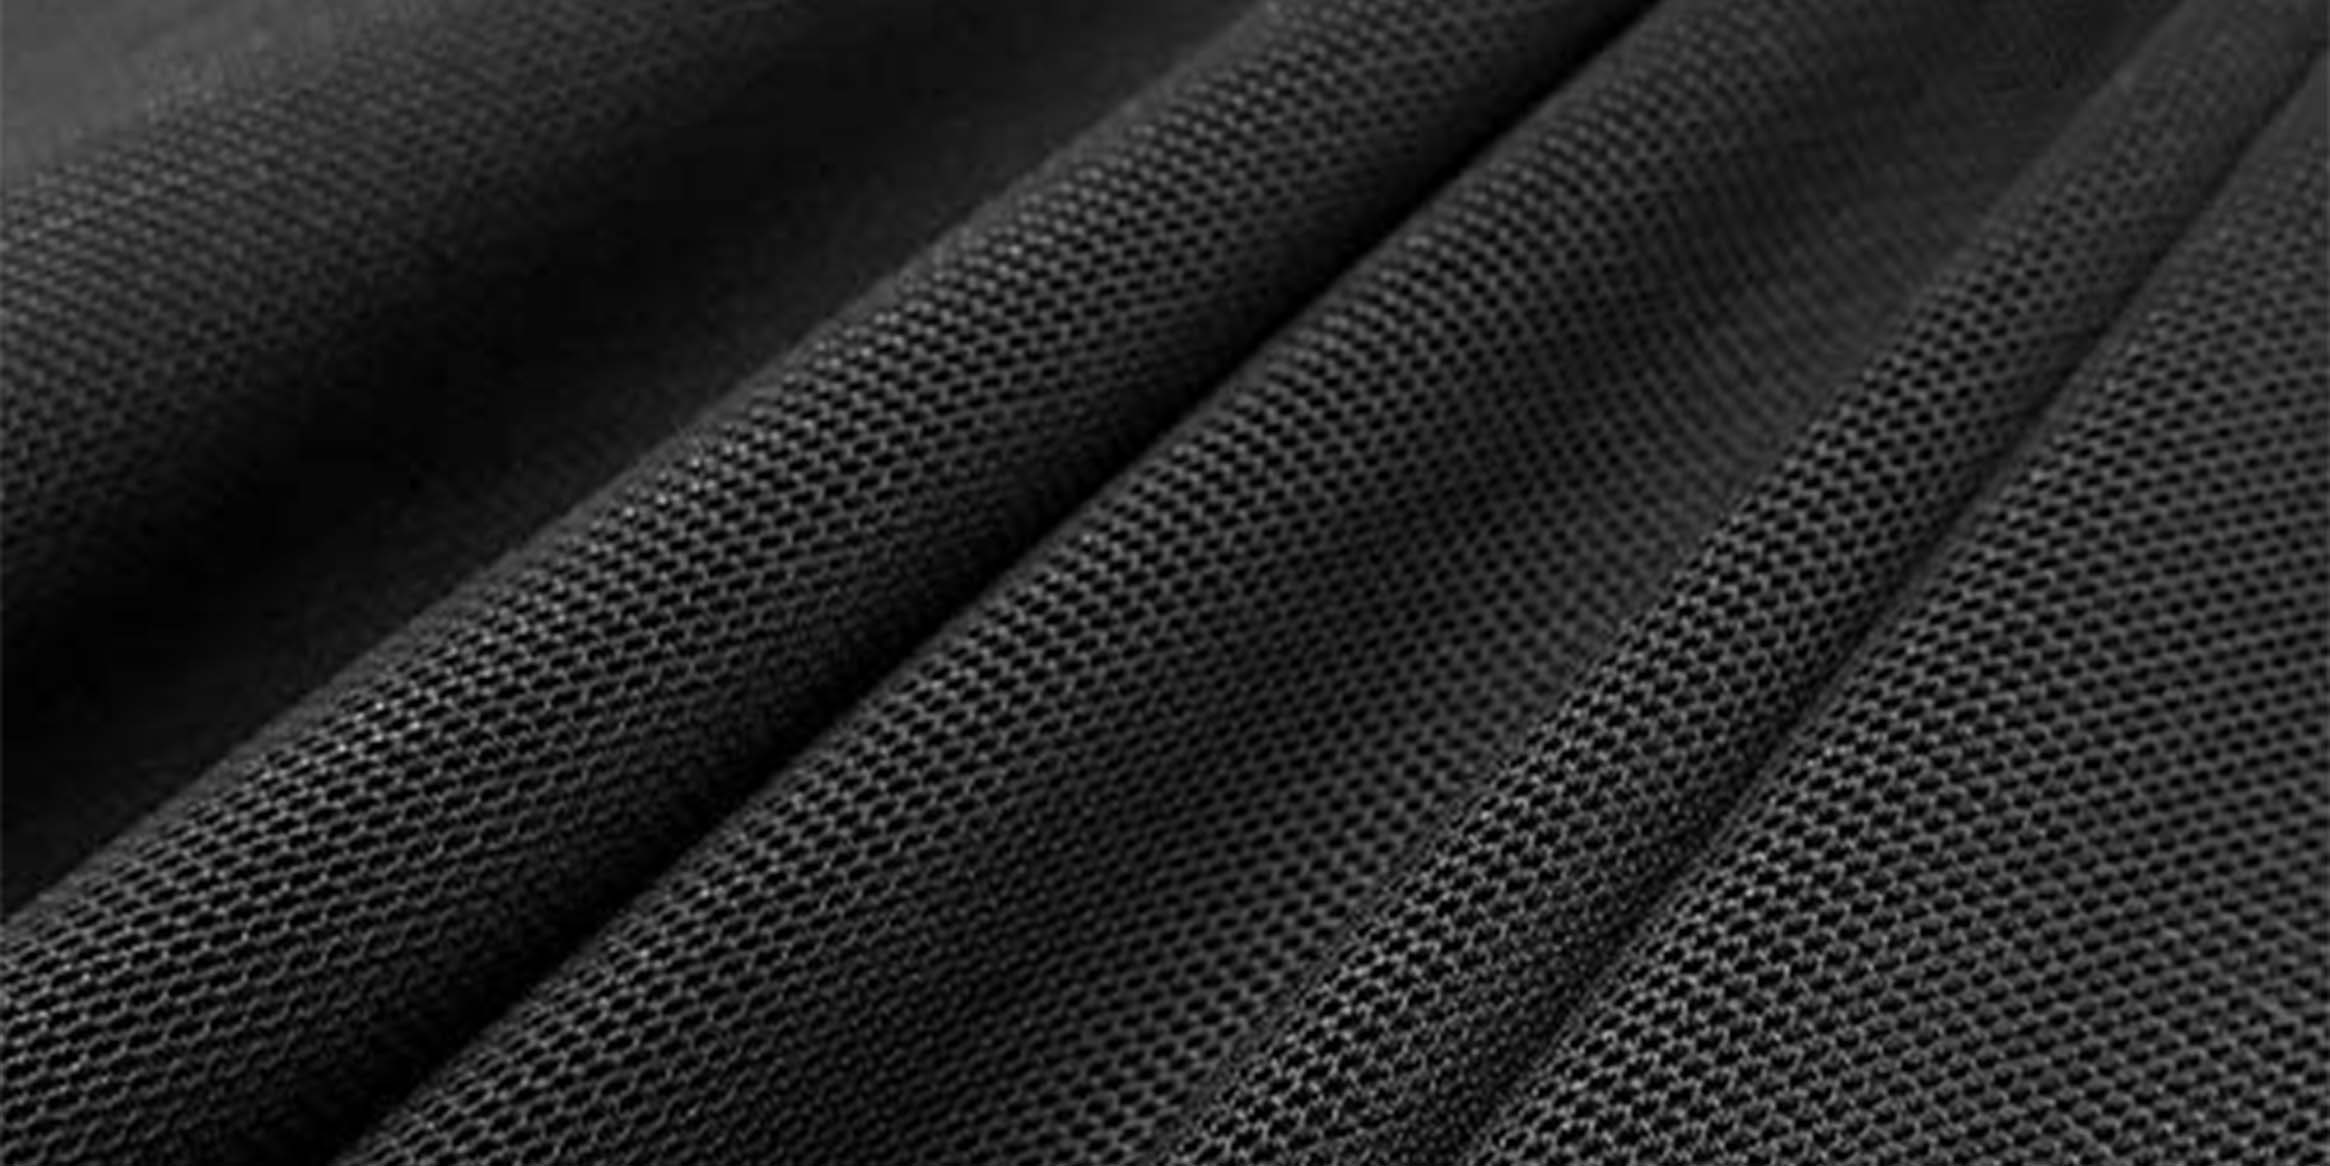 Mesh Fabric By The Yard  Fabric Wholesale Direct